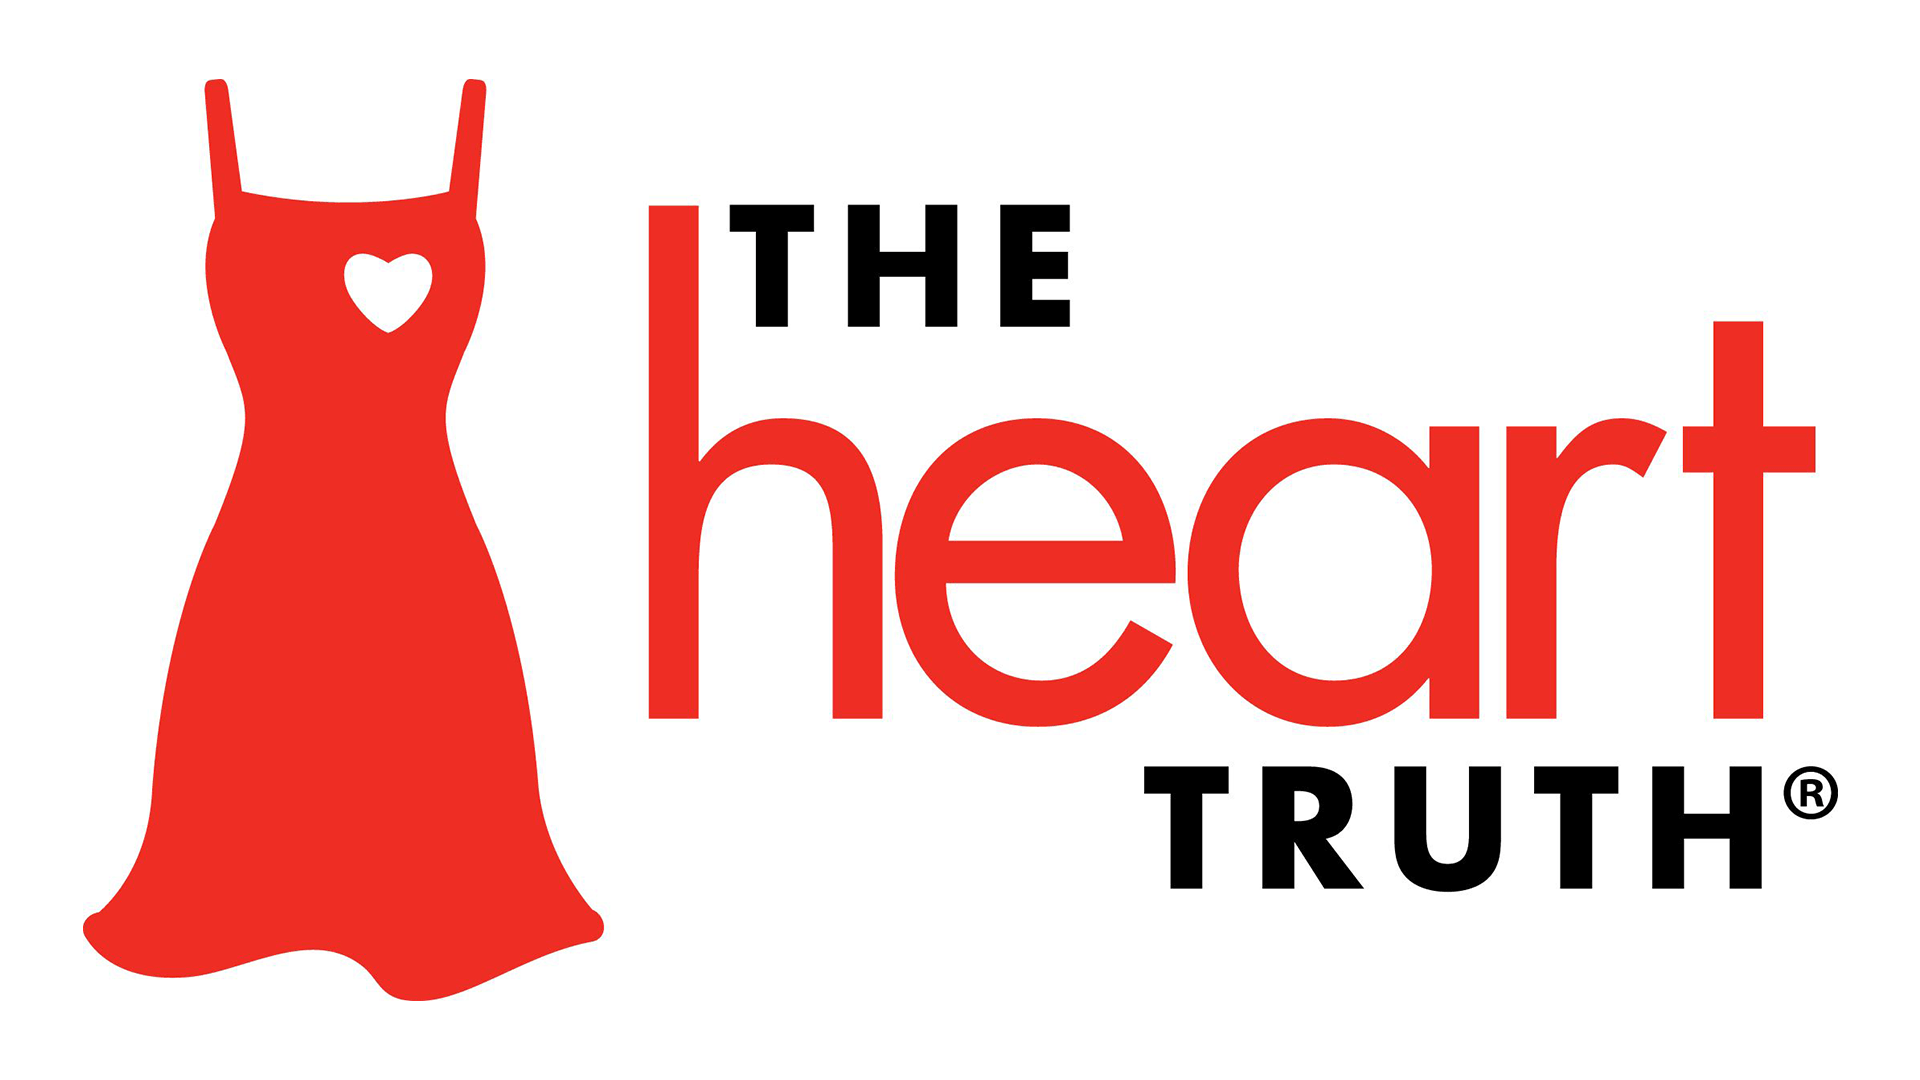 Red Dress Logo - The Heart Truth. National Heart, Lung, and Blood Institute (NHLBI)